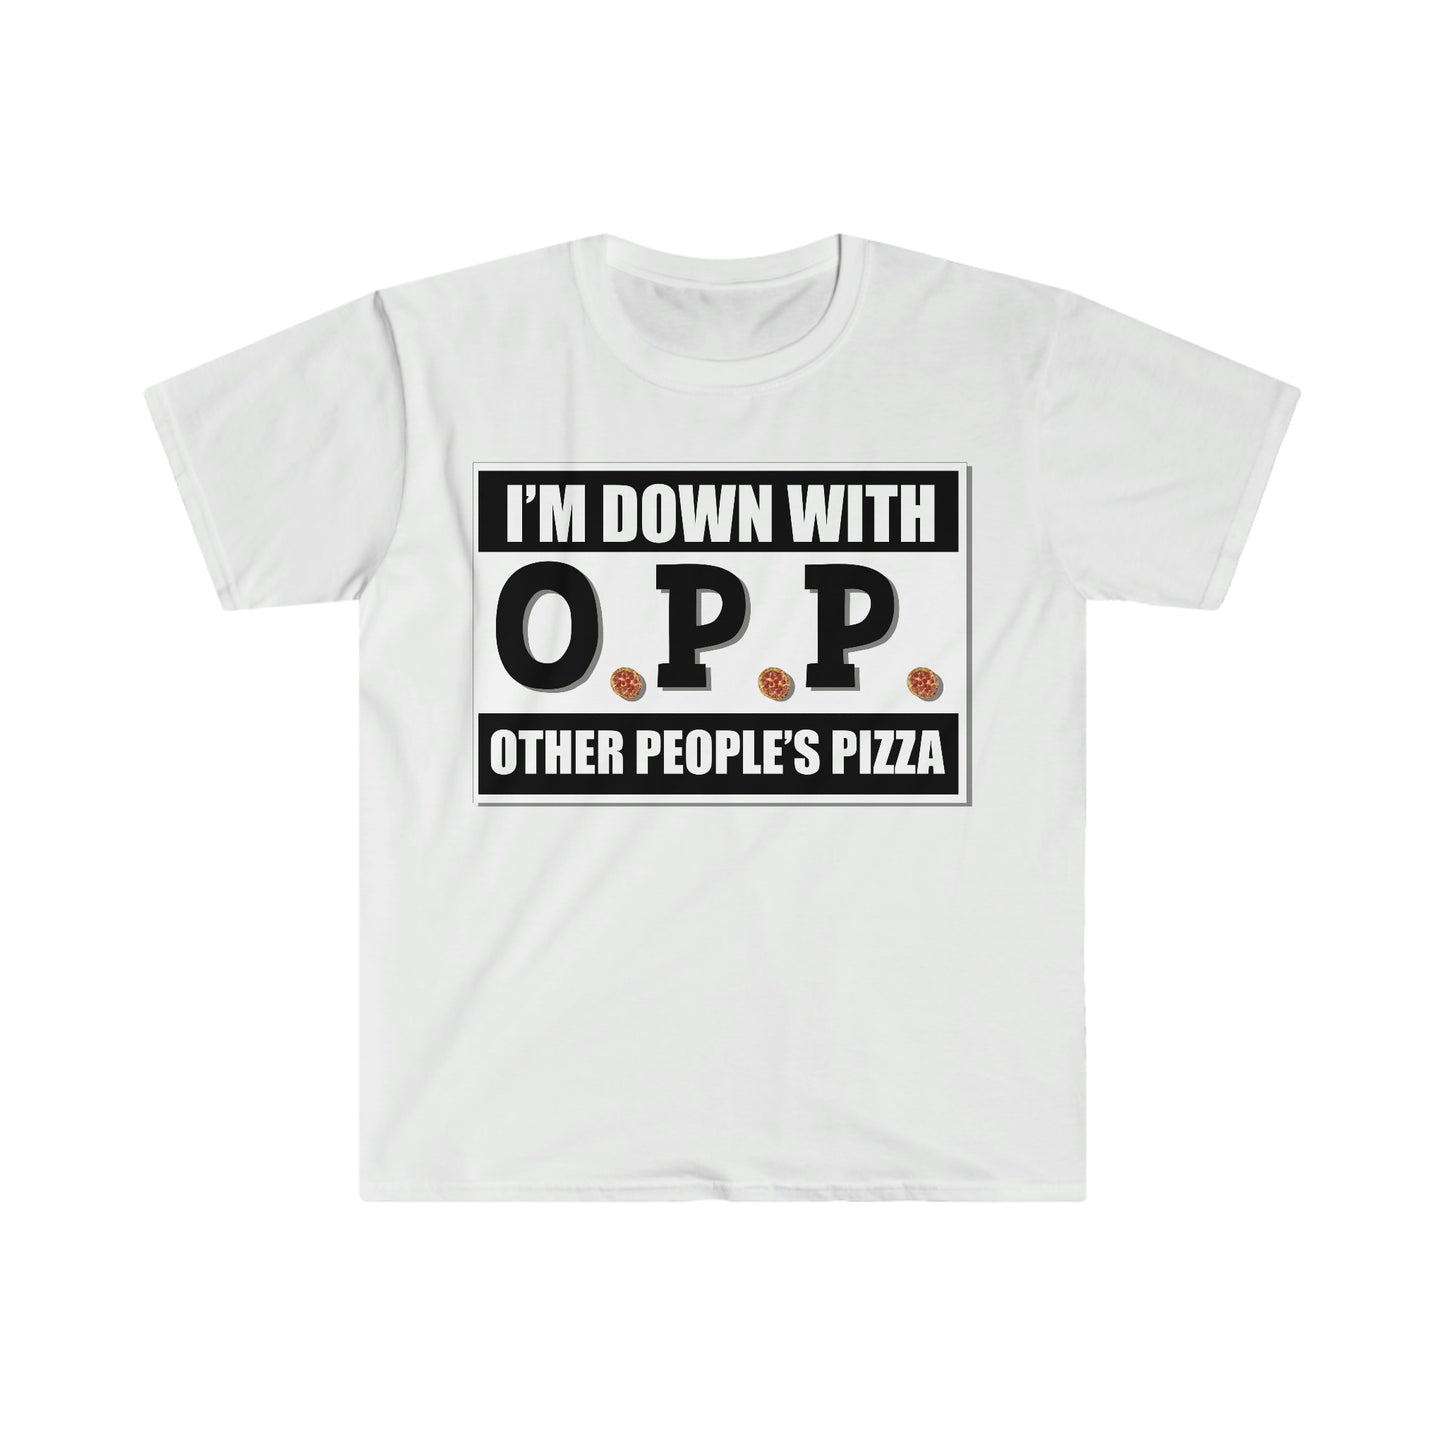 OTHER PEOPLE'S PIZZA